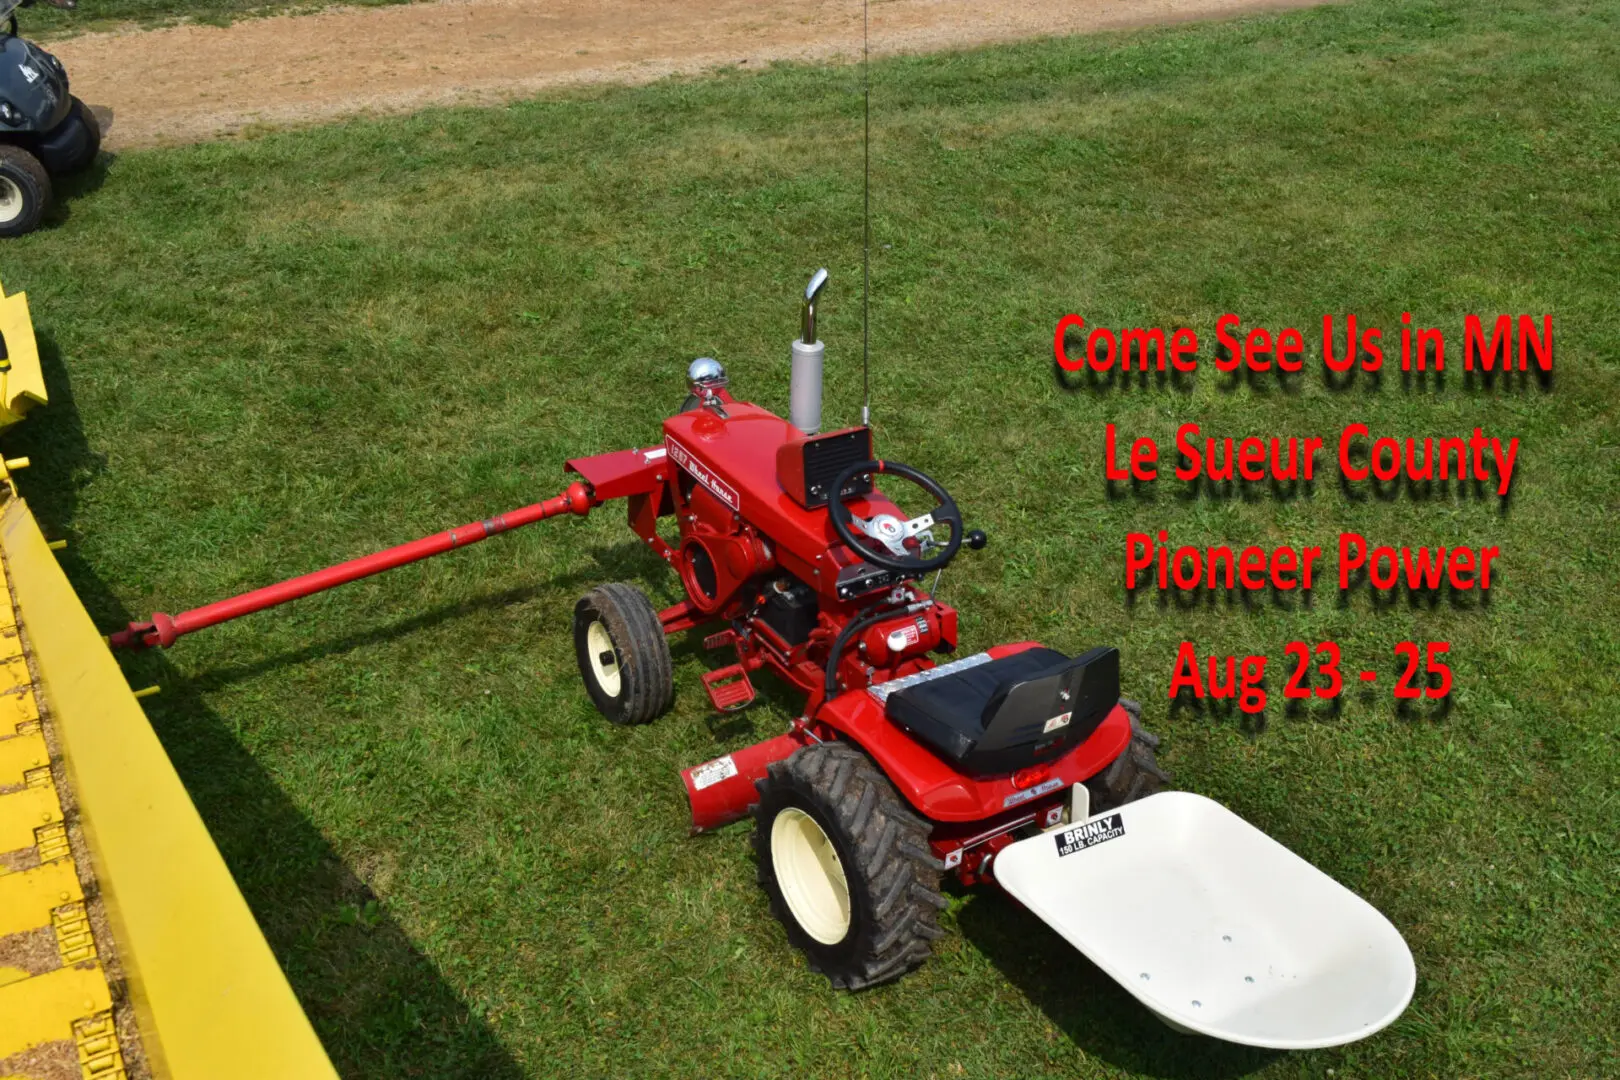 Come See Us in MN LE Sueur County Pioneer power